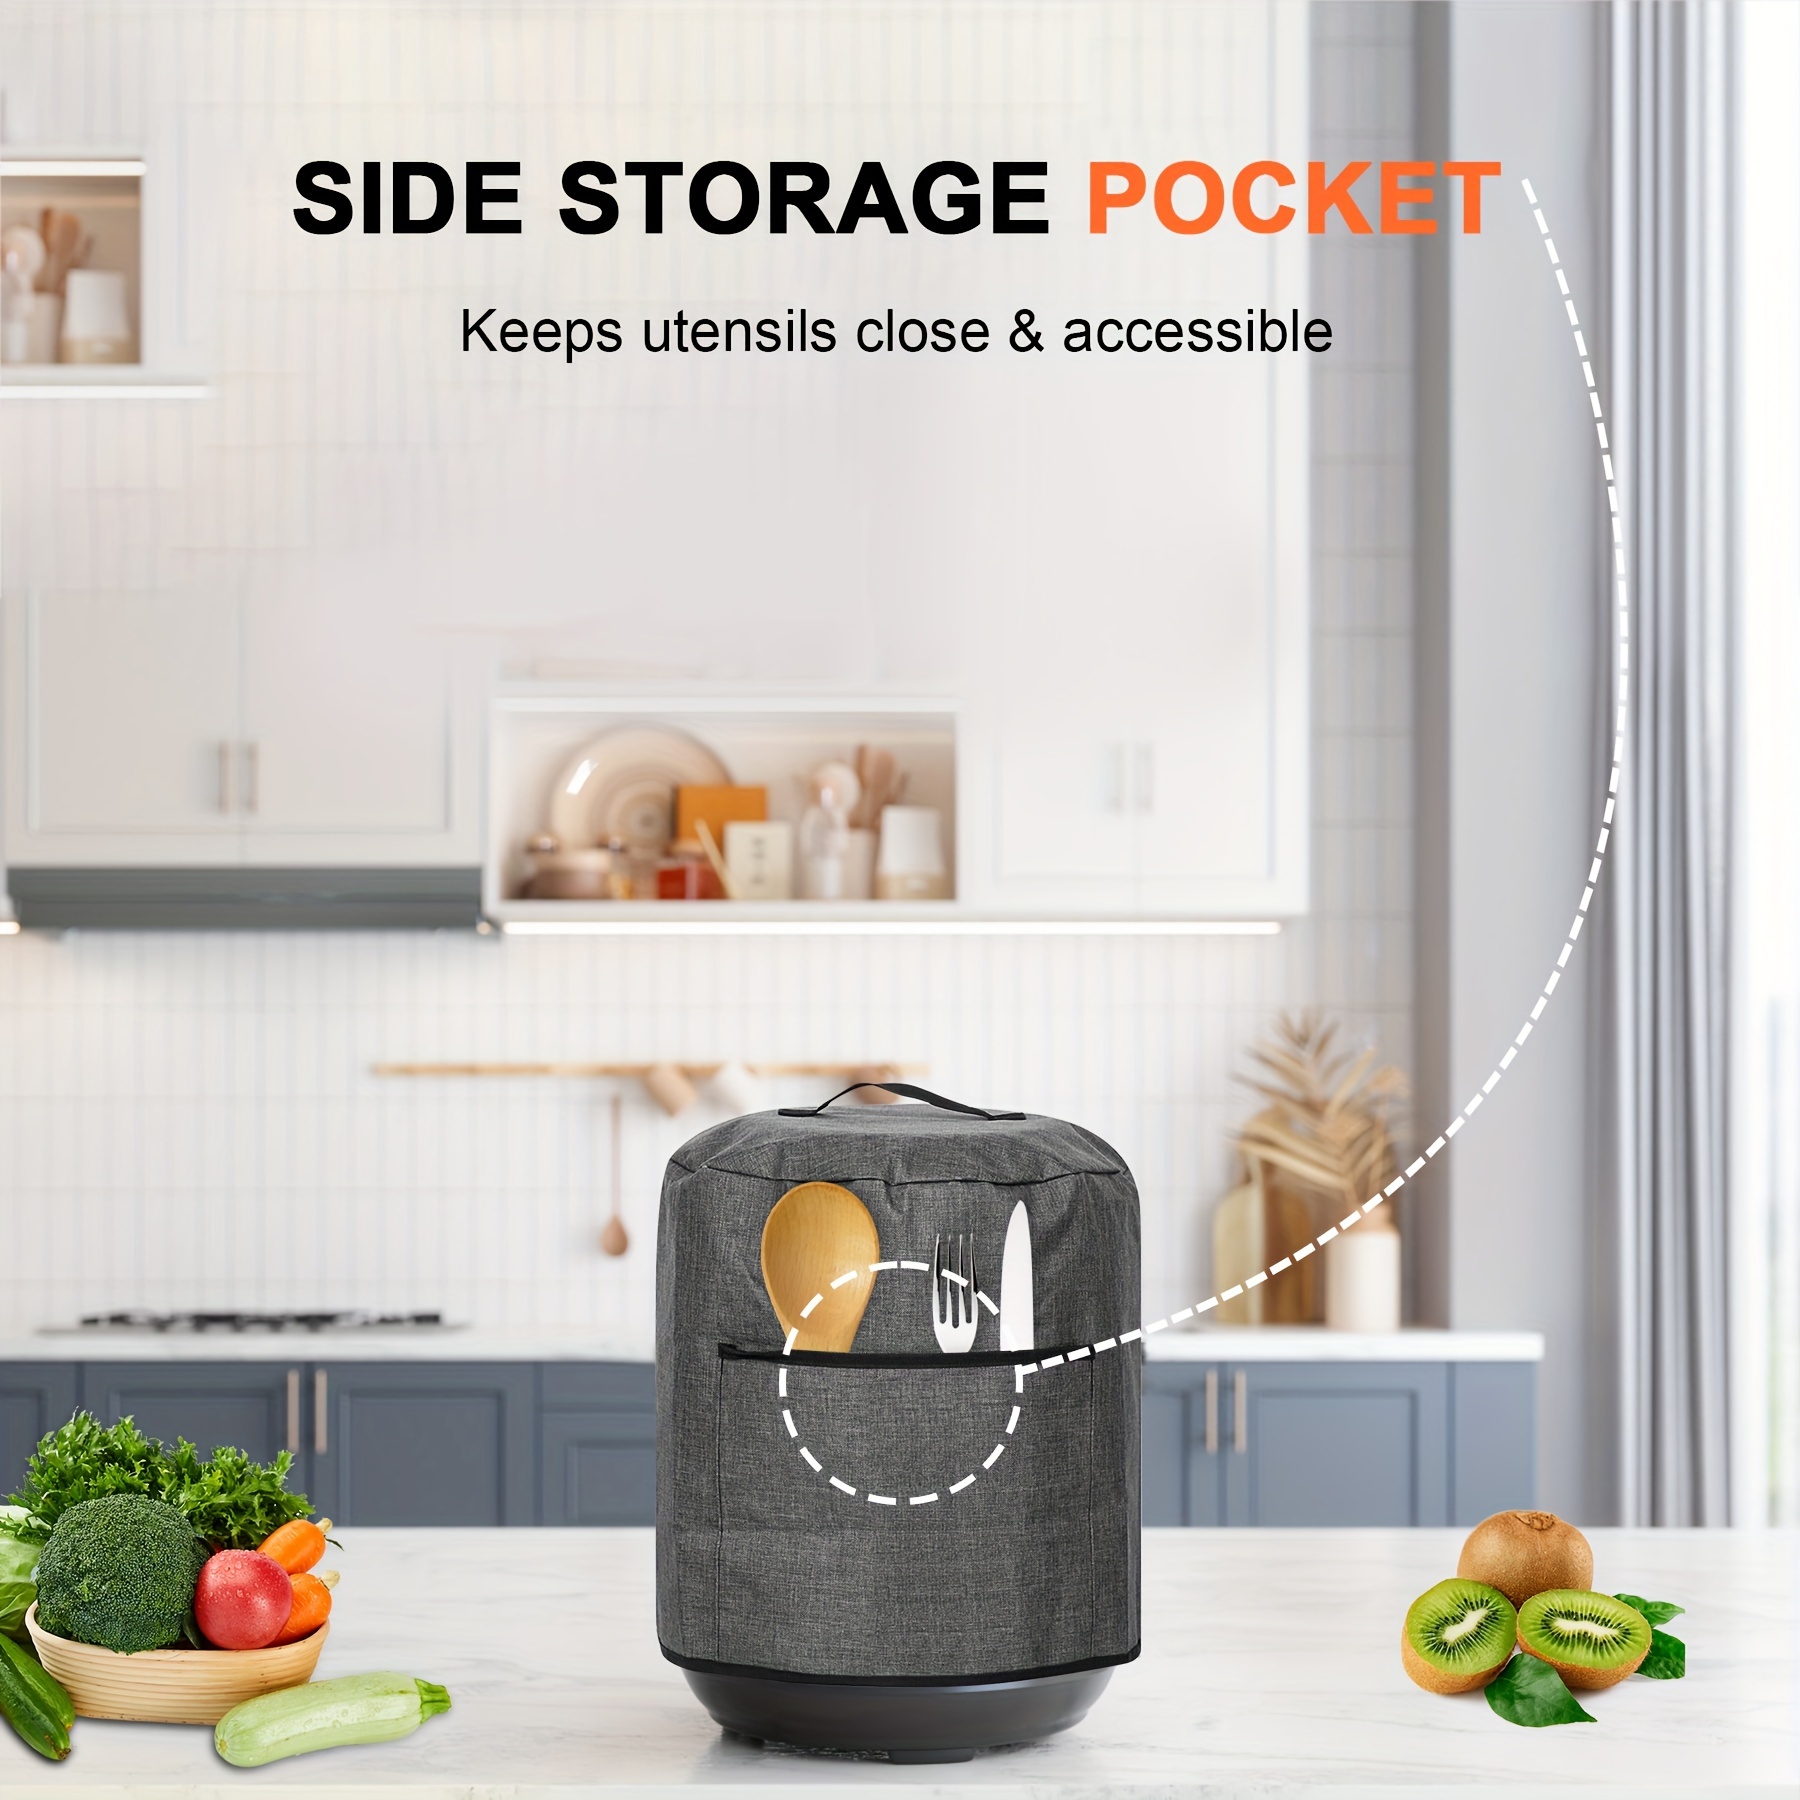 Dust Cover For Air Fryer, Air Fryer Cover With Storage Pockets